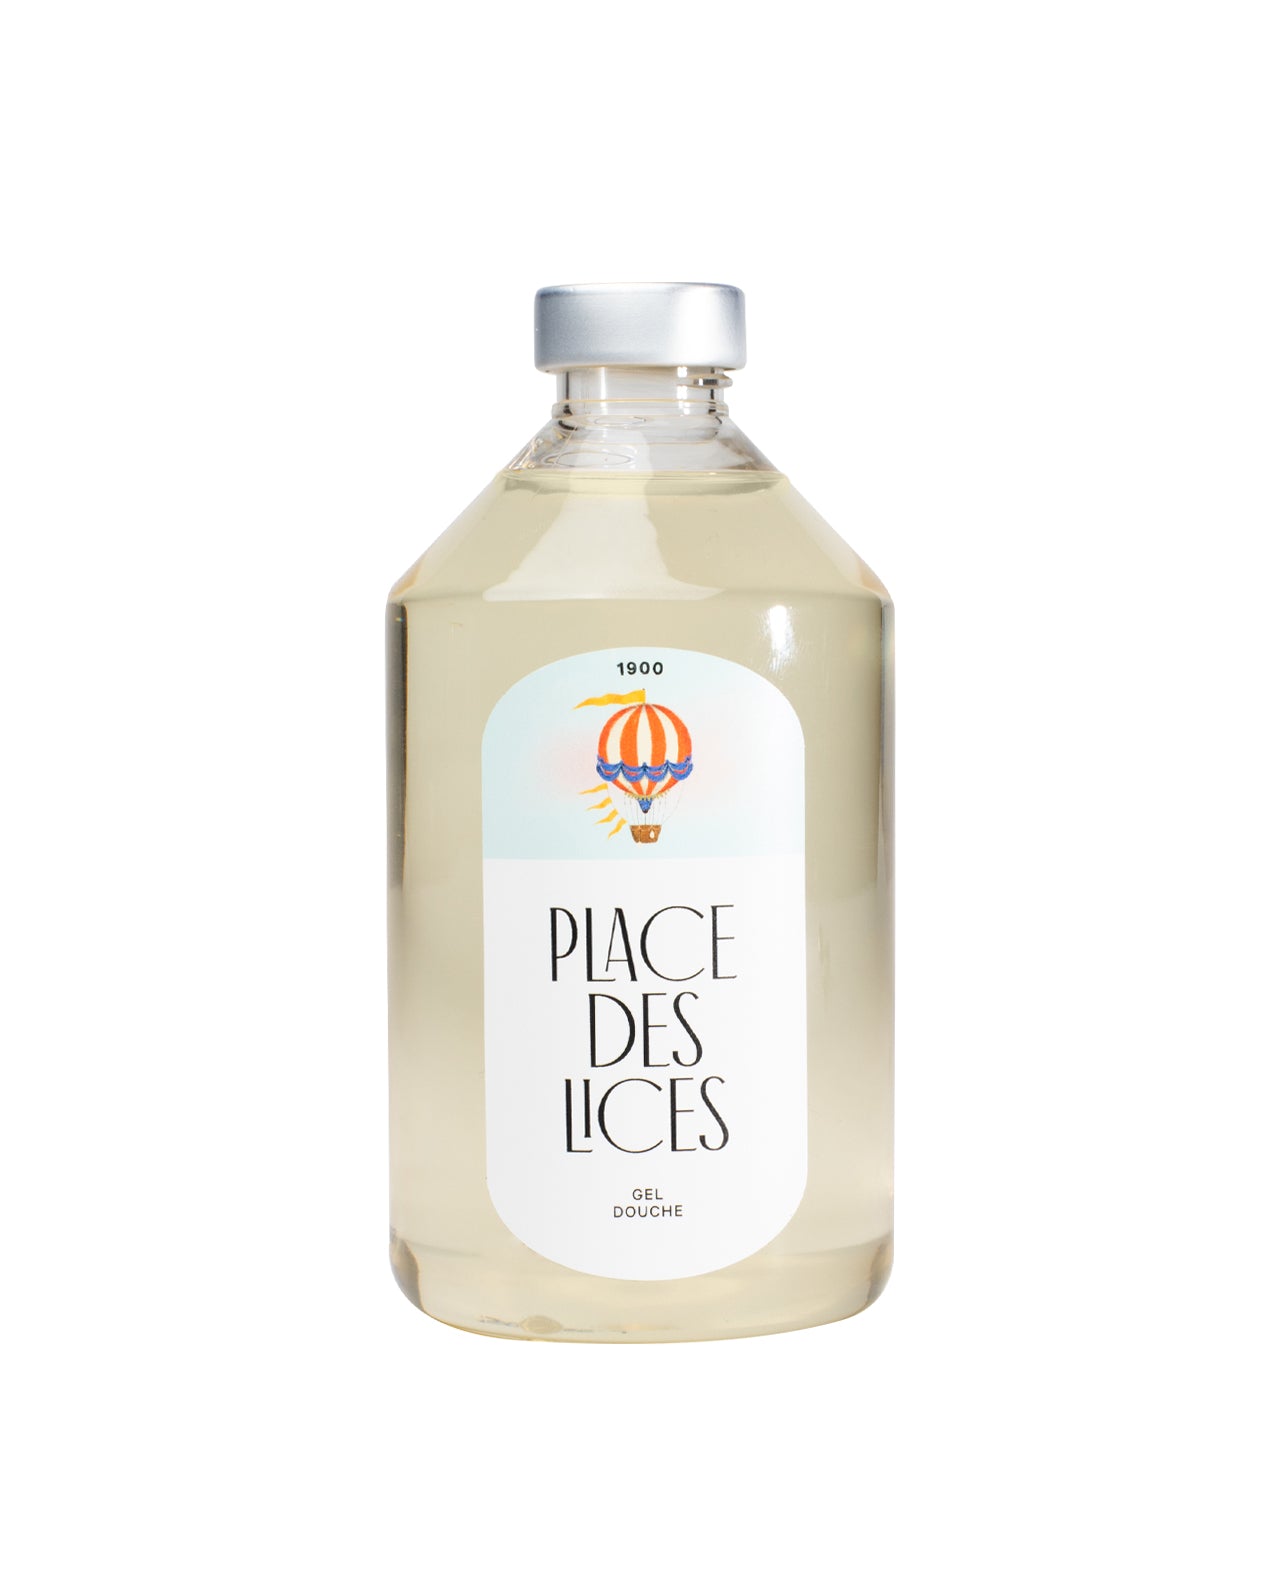 1900 500ml Body Wash by Place des Lices